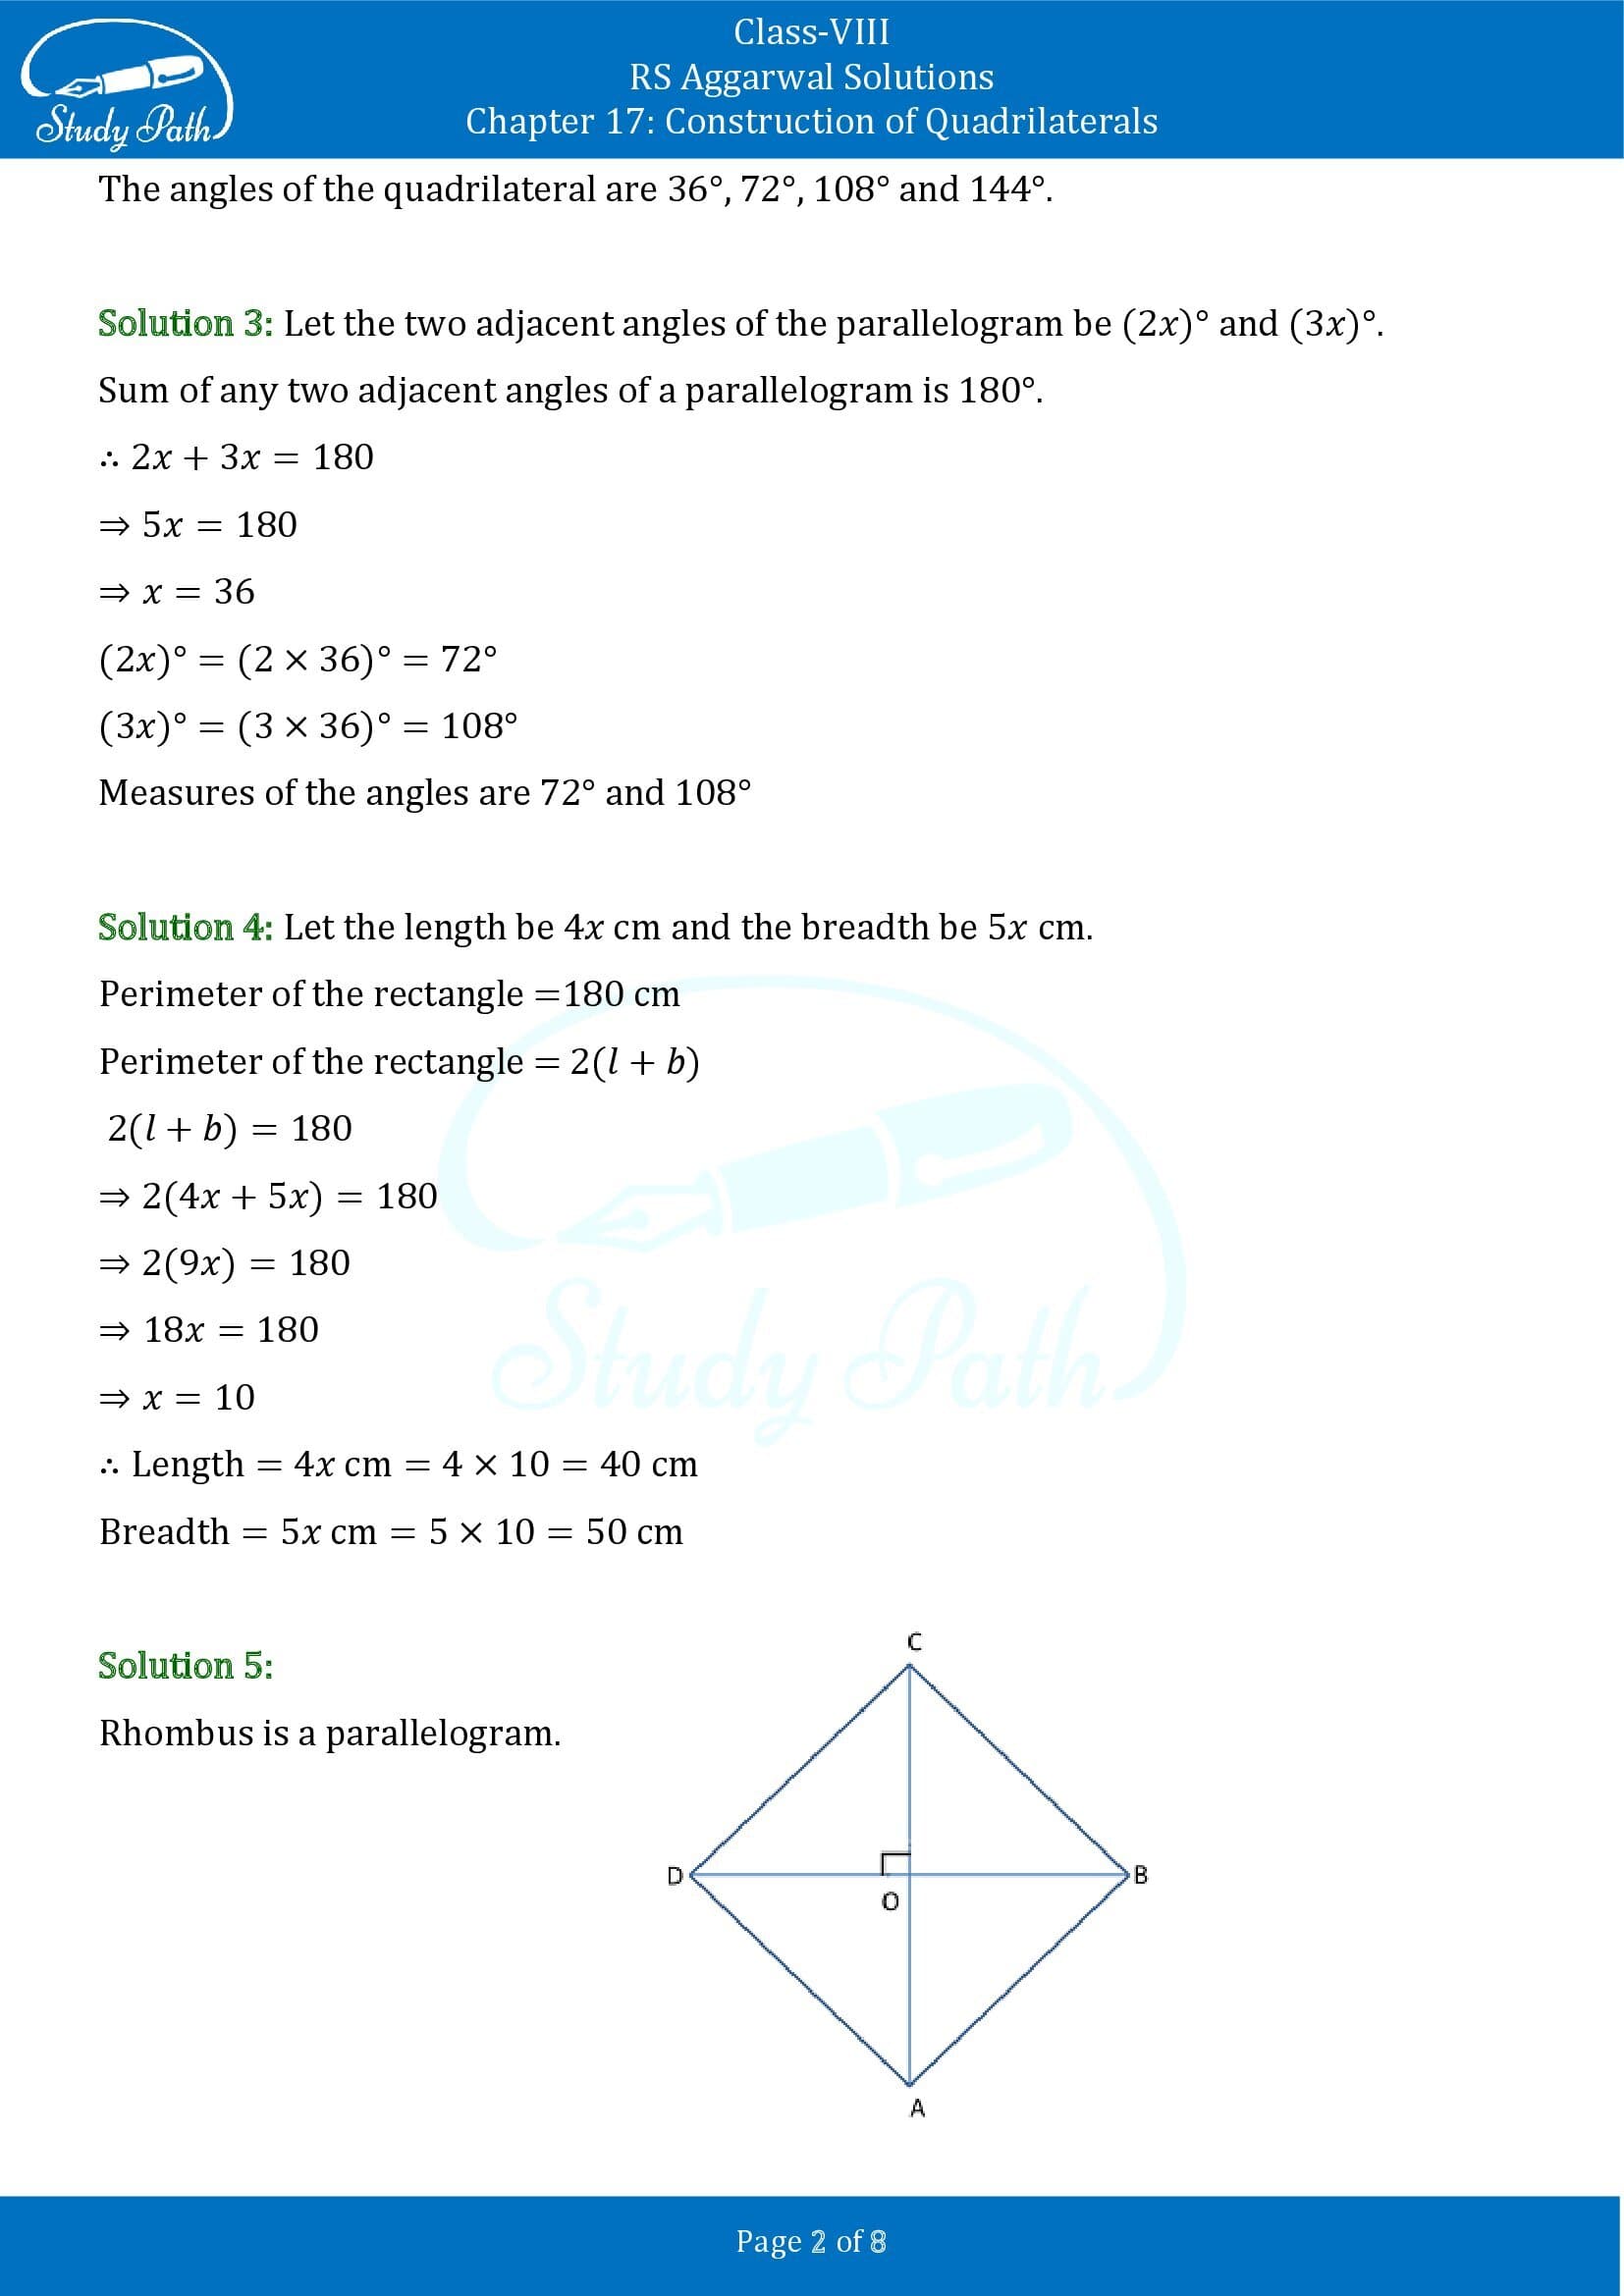 RS Aggarwal Solutions Class 8 Chapter 17 Construction of Quadrilaterals Test Paper 0002